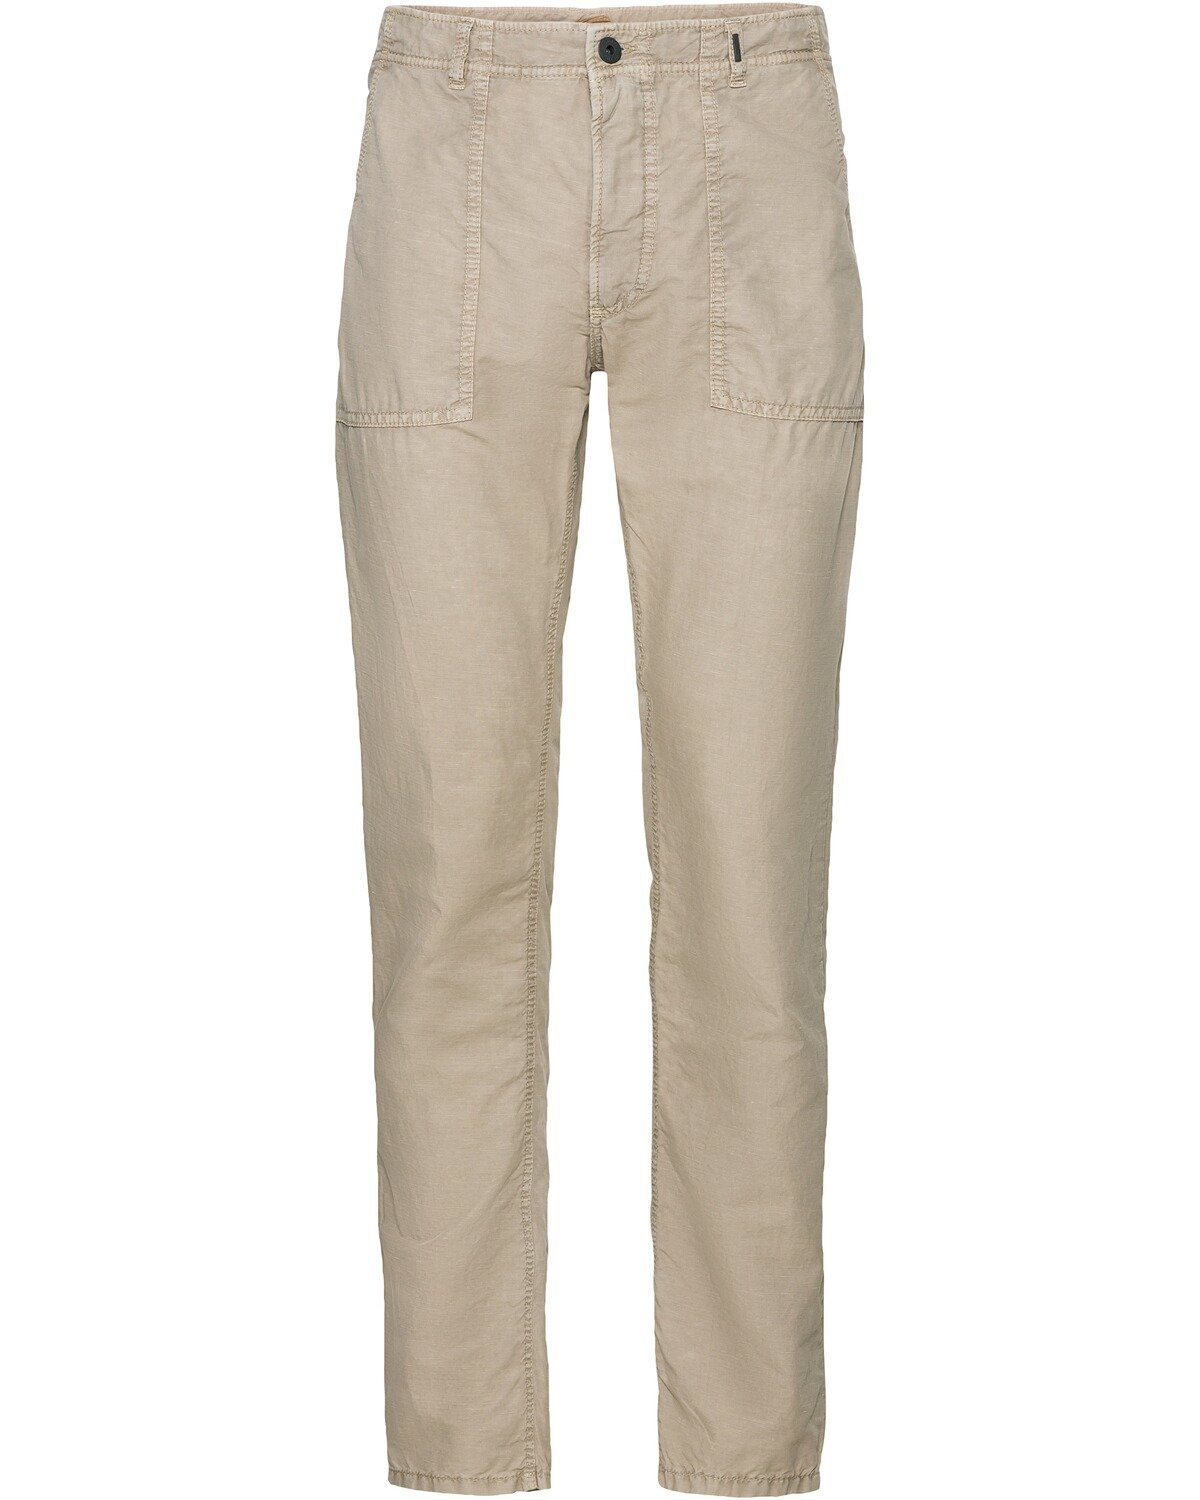 camel active Chinos Chino Tapered Fit Beige